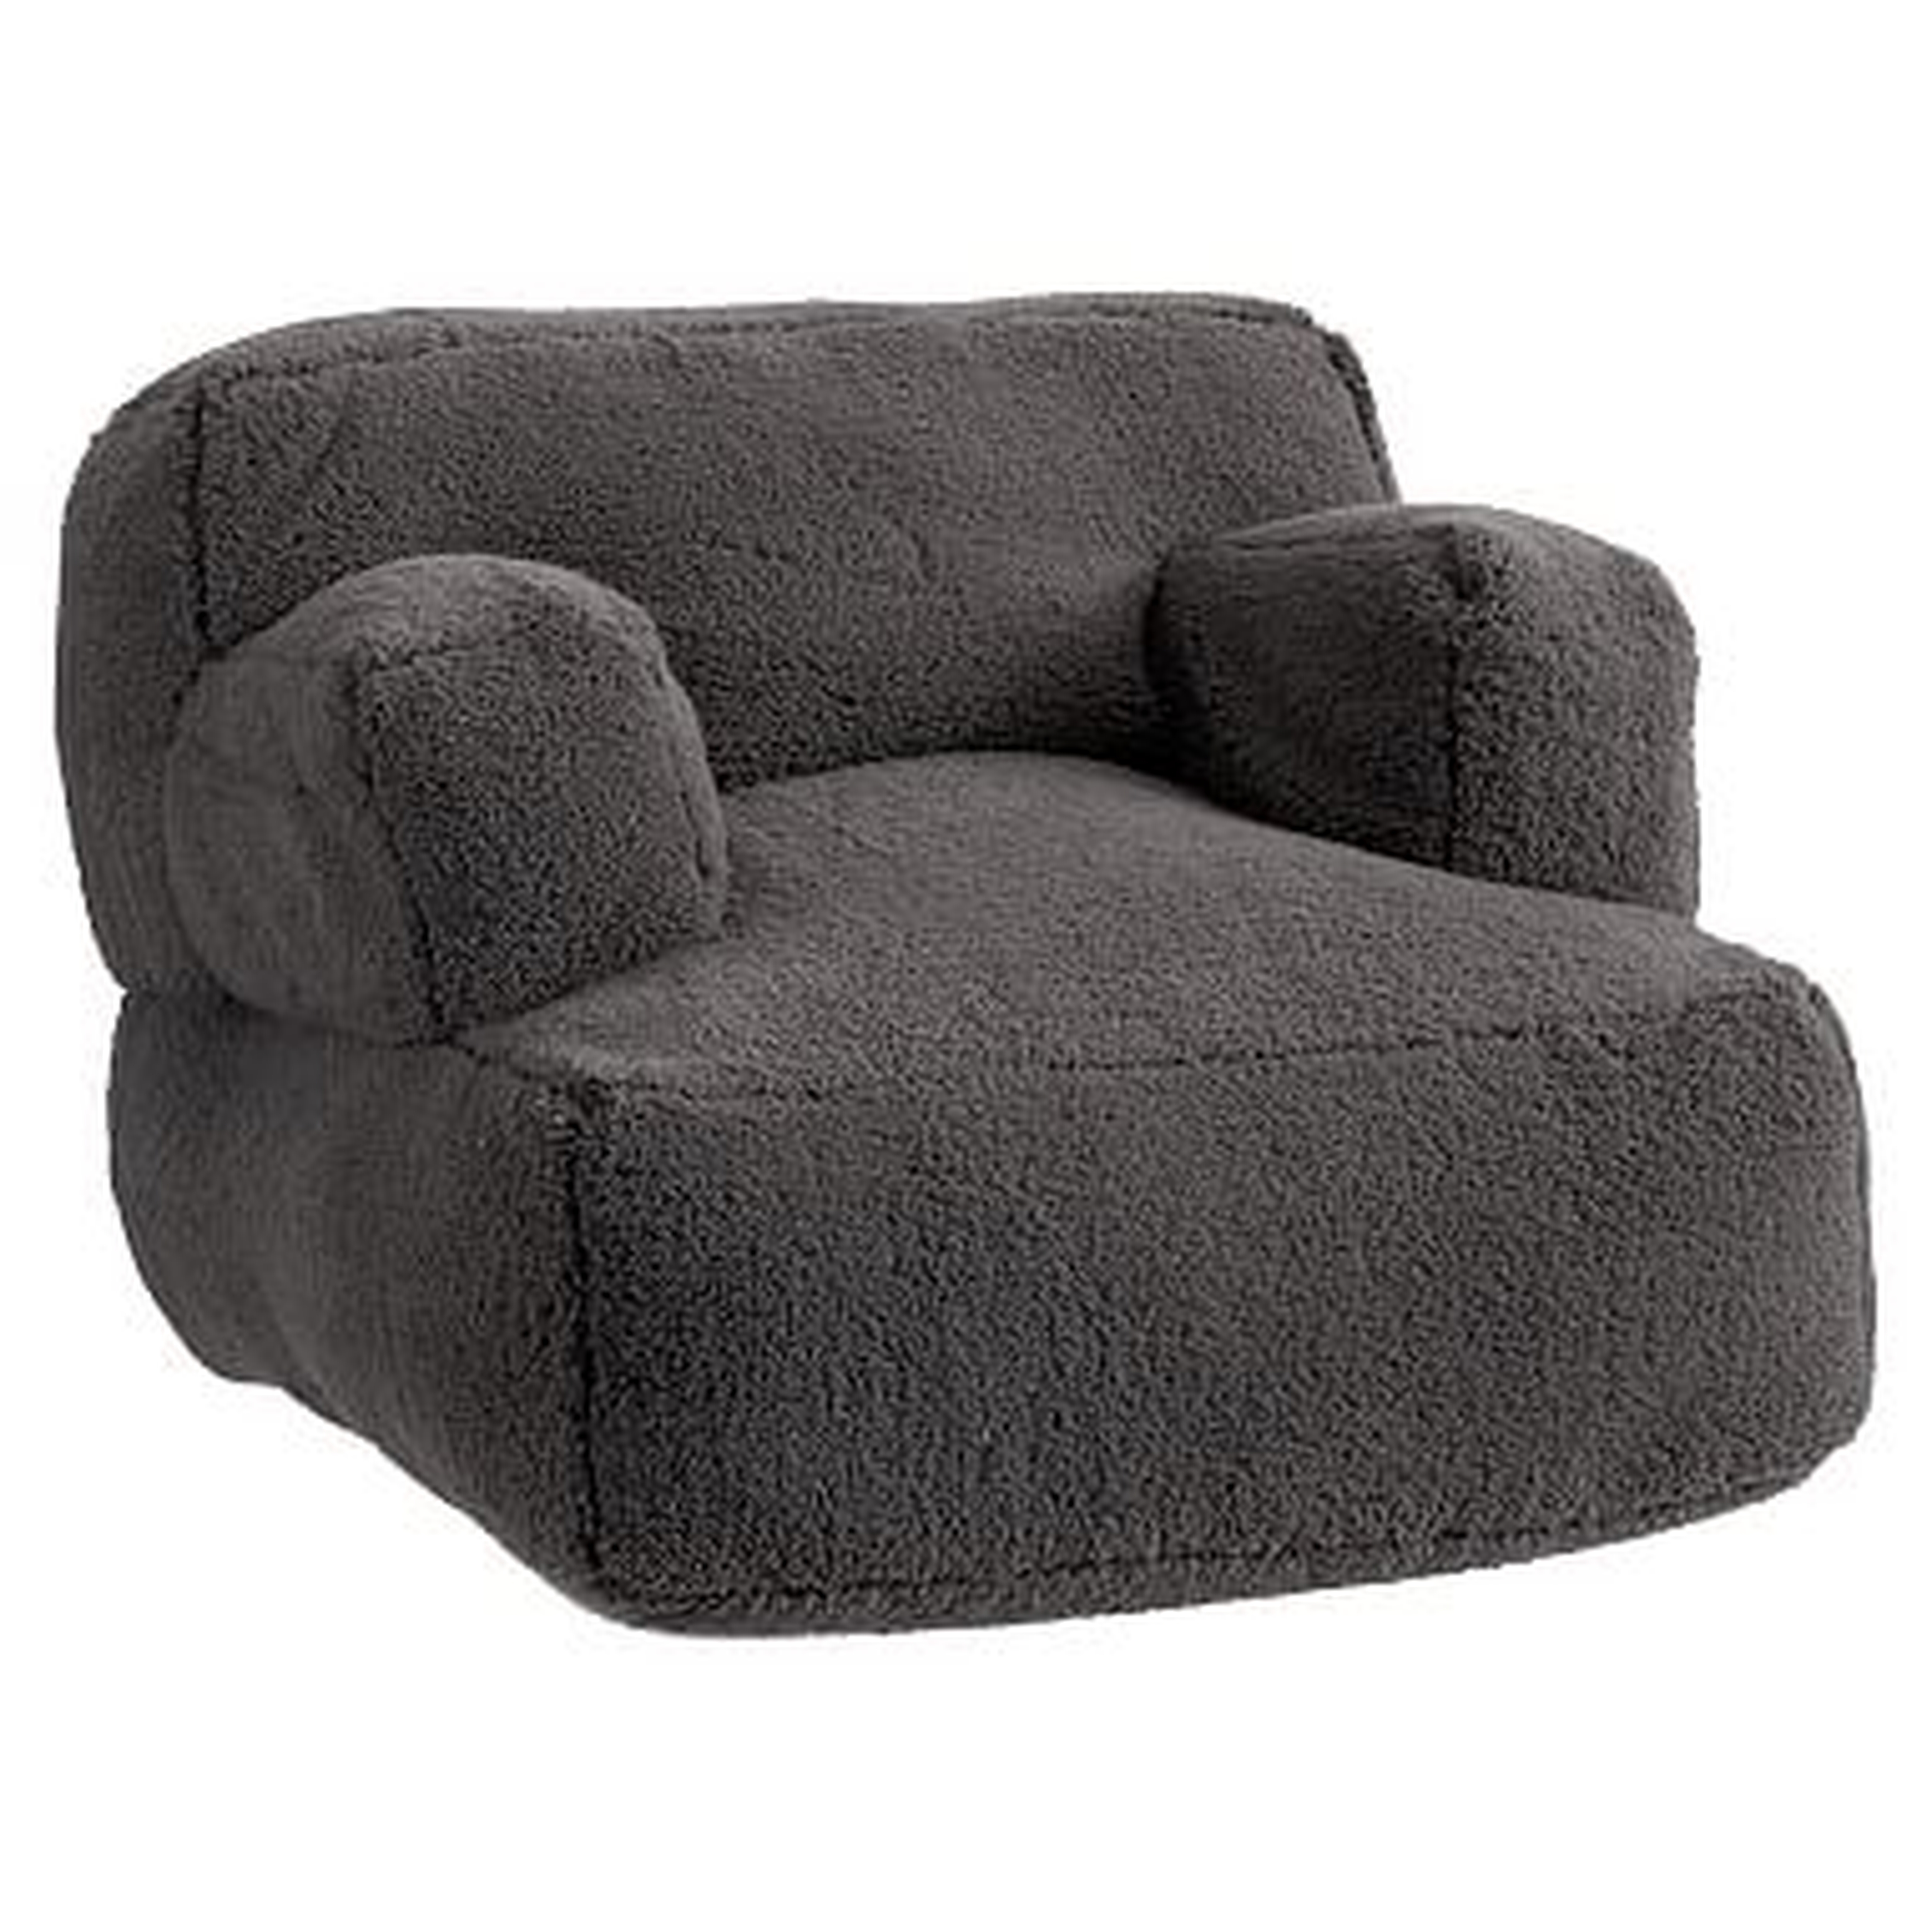 Charcoal Sherpa Faux-Fur Eco-Lounger, Large - Pottery Barn Teen